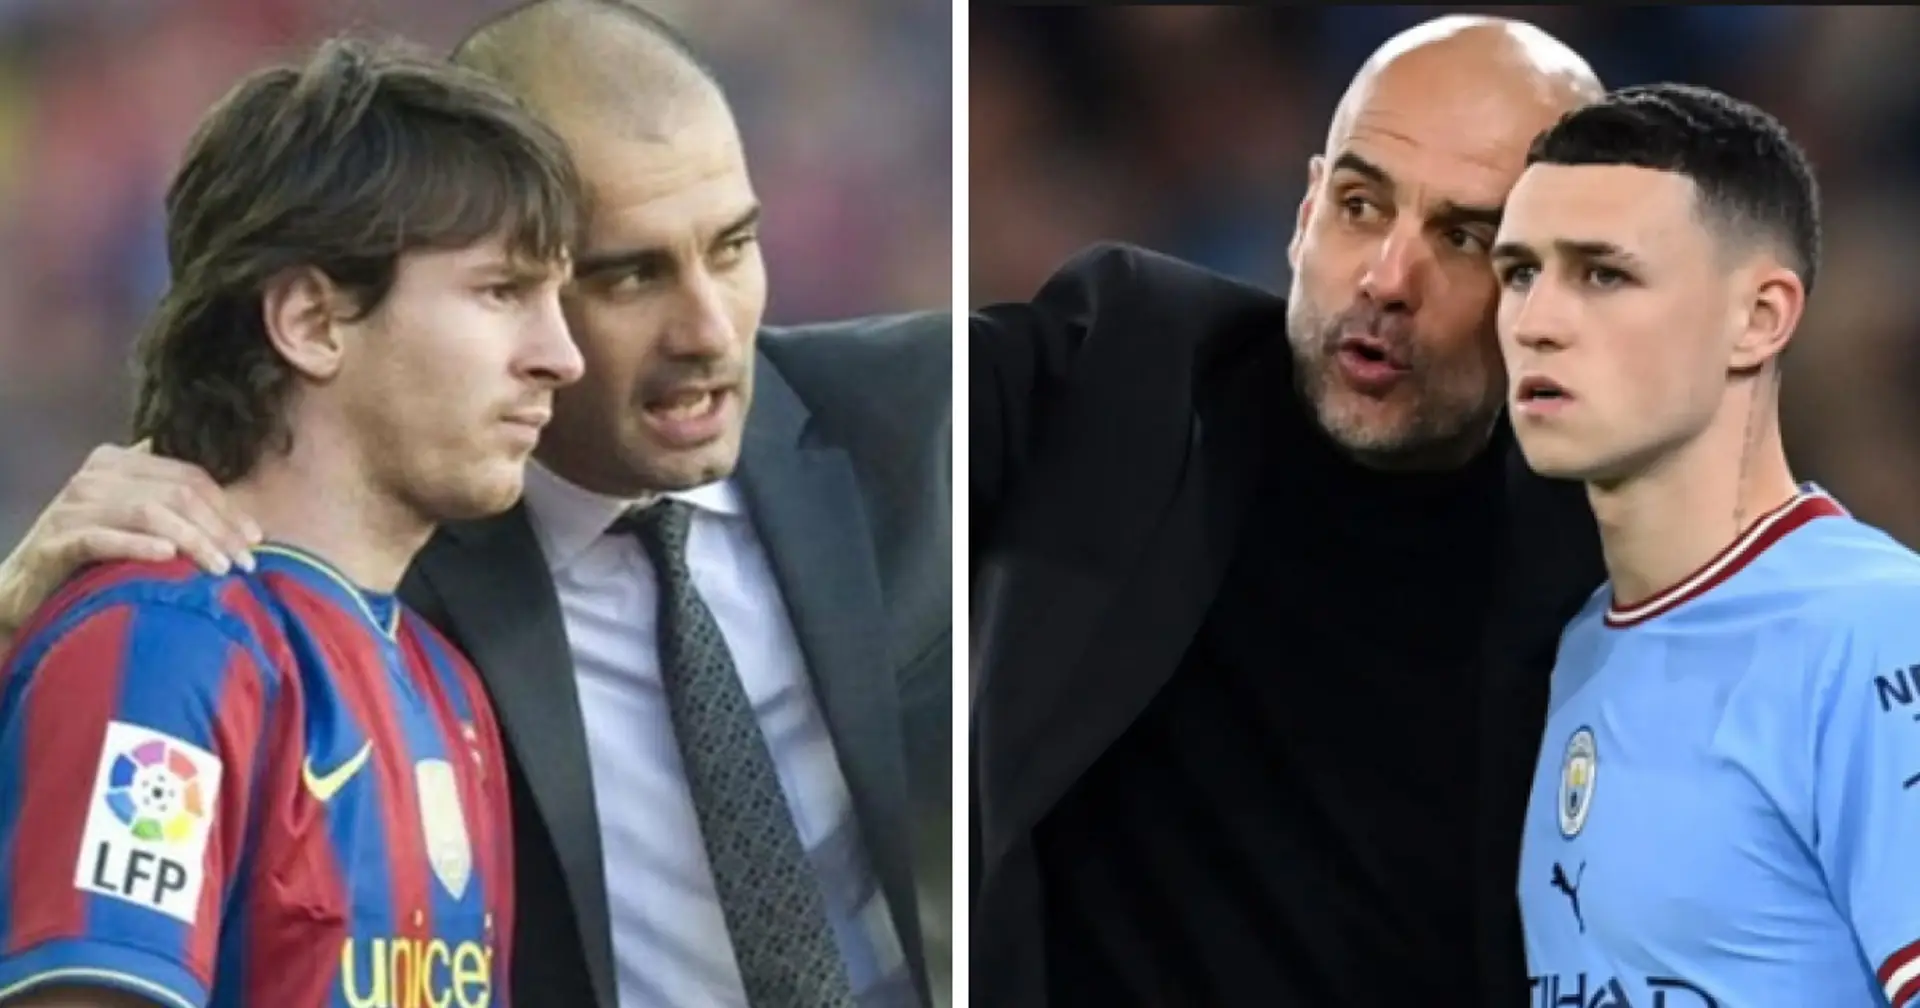 Pep Guardiola compares Foden to Messi after Man United derby 